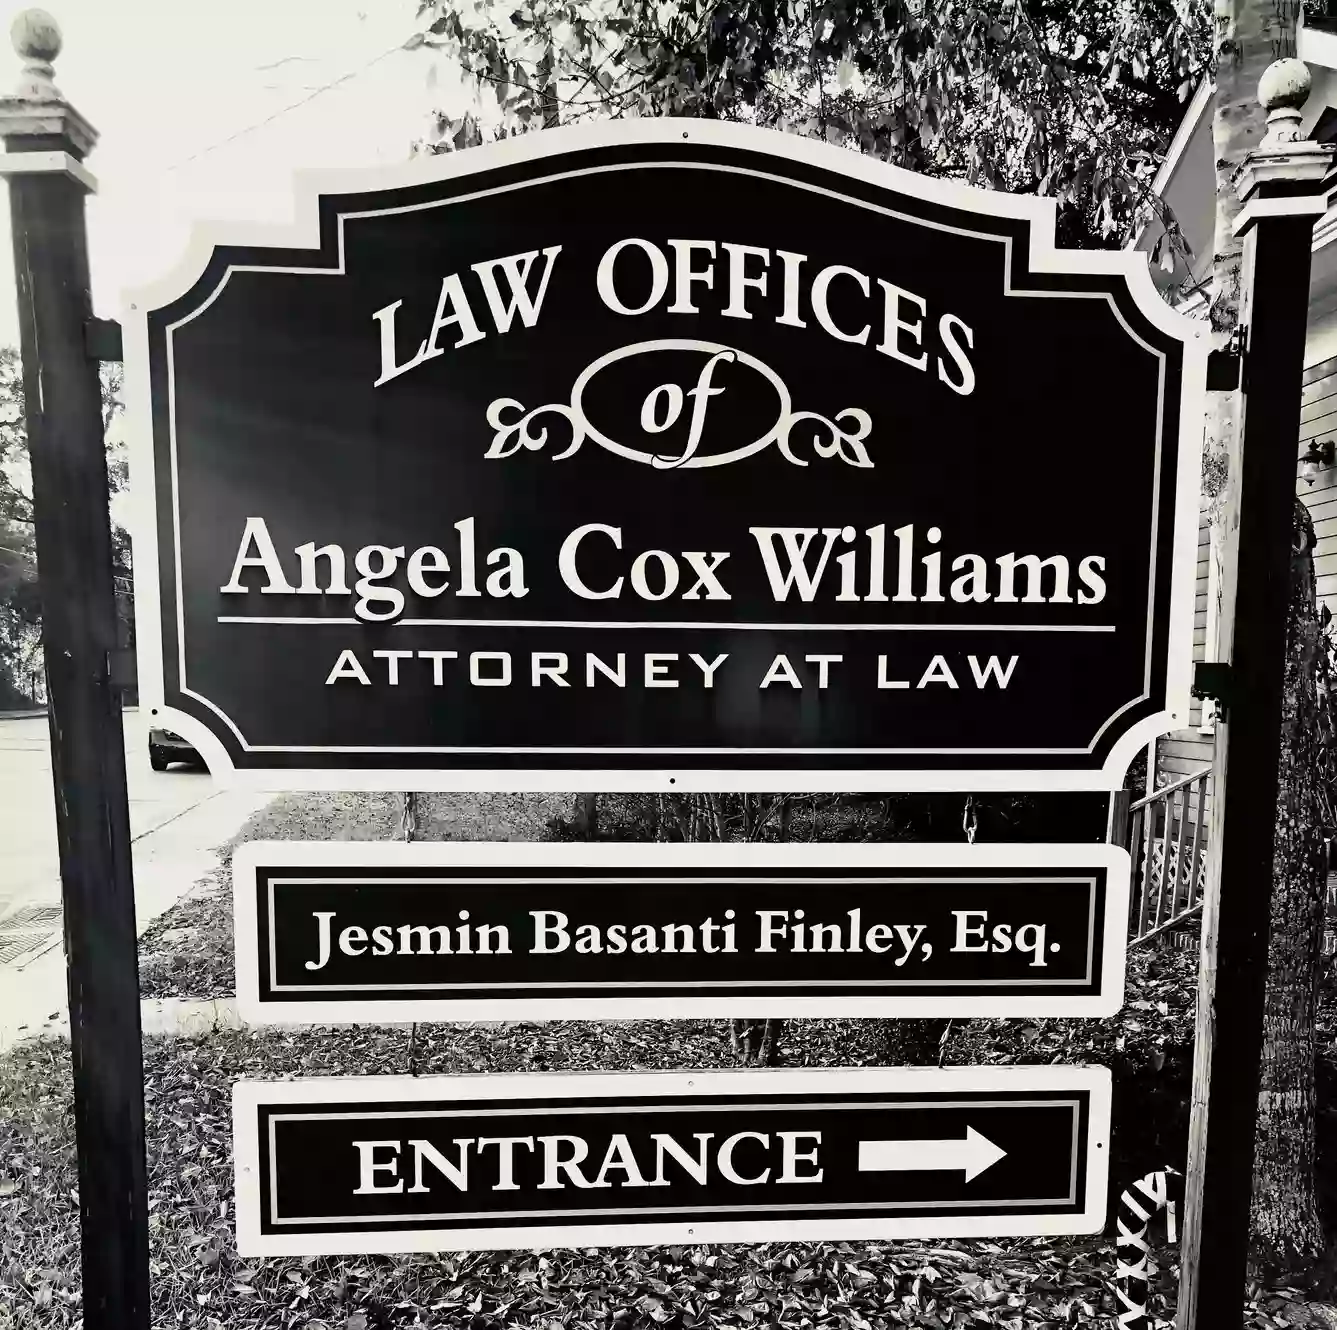 Law Office of Angela Cox Williams